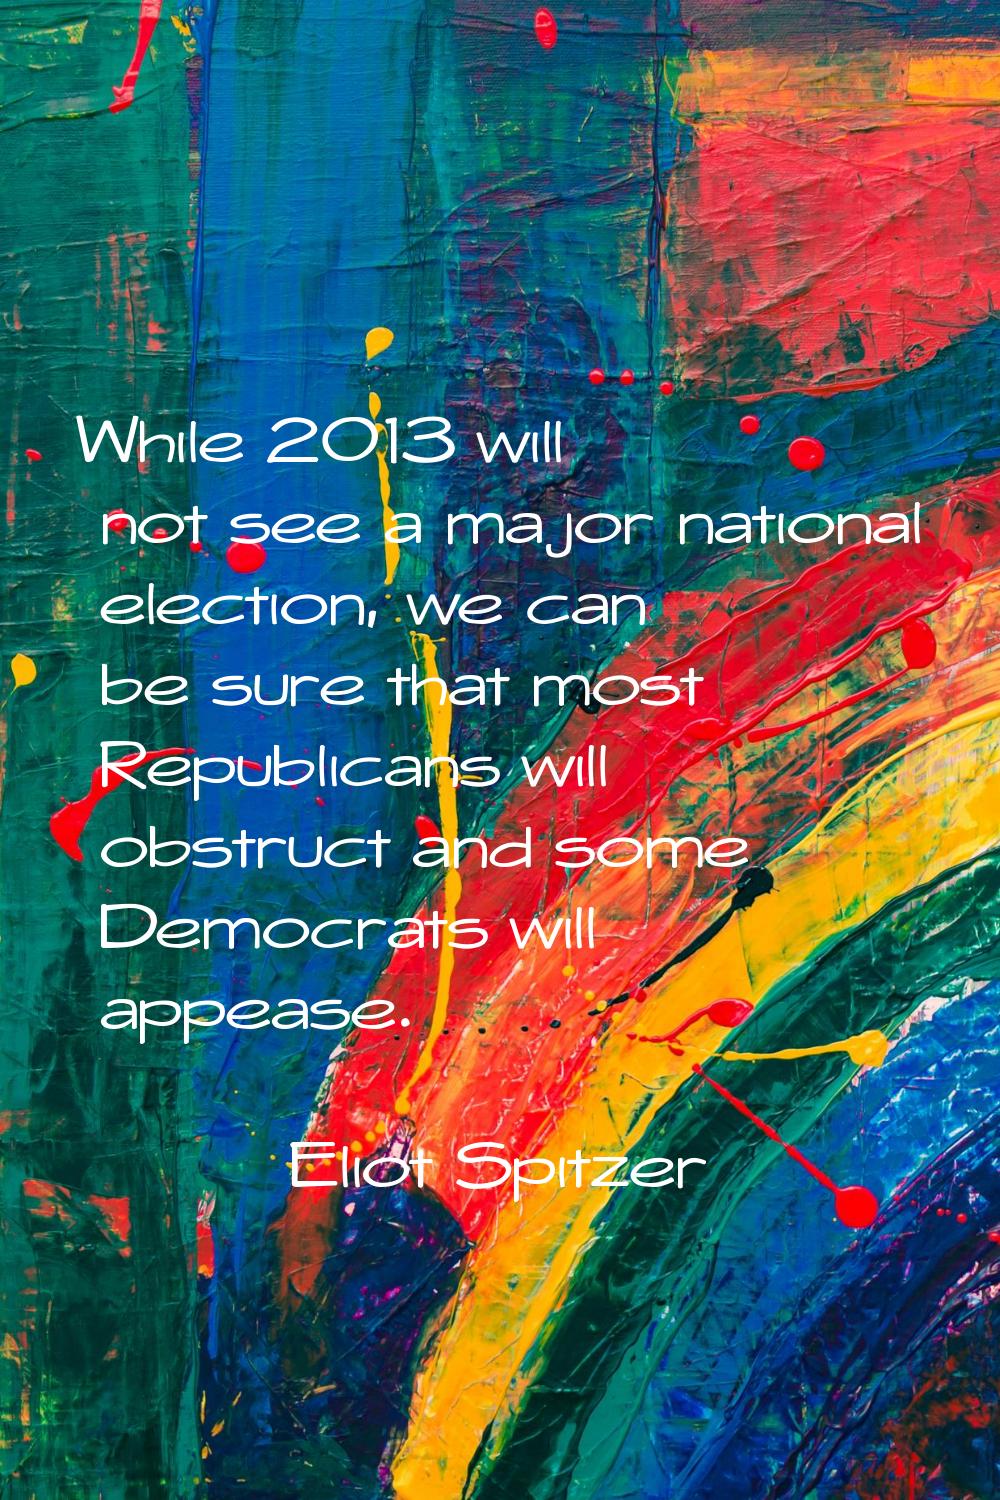 While 2013 will not see a major national election, we can be sure that most Republicans will obstru